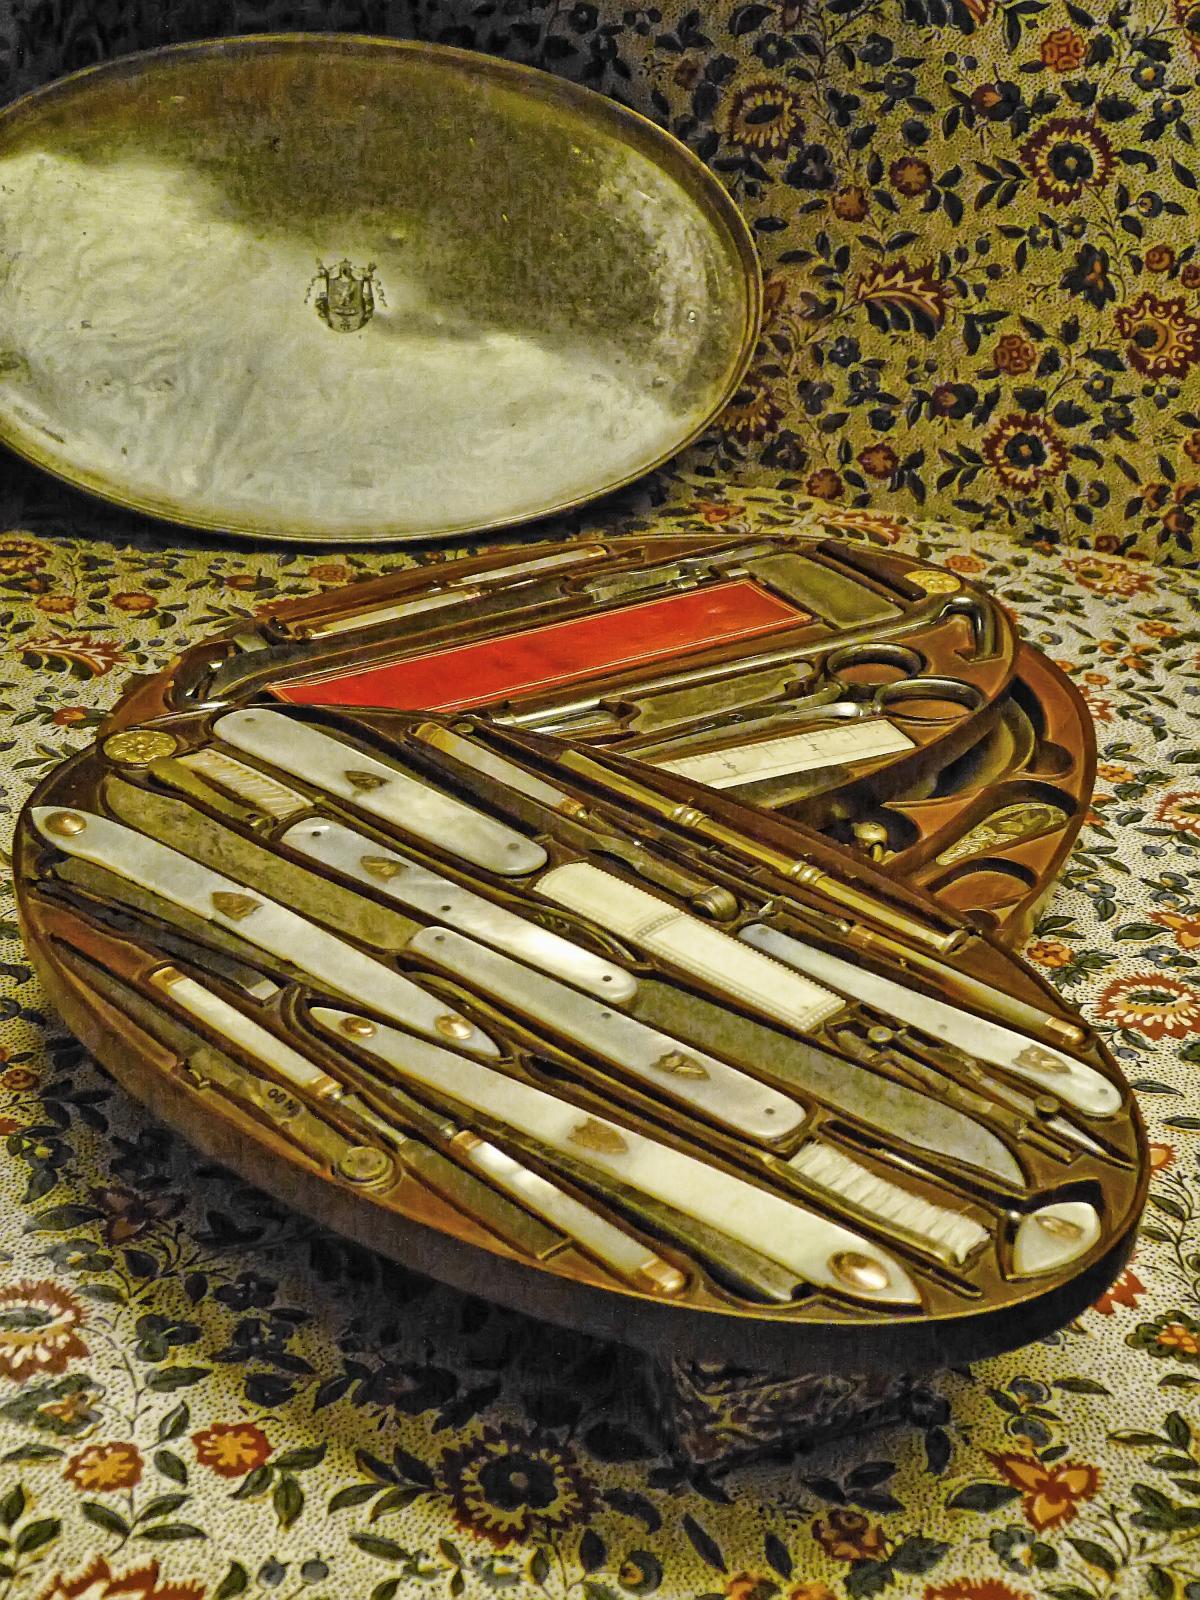 Napoleon’s pearl-handled grooming kit with gold accents at Fontainebleau